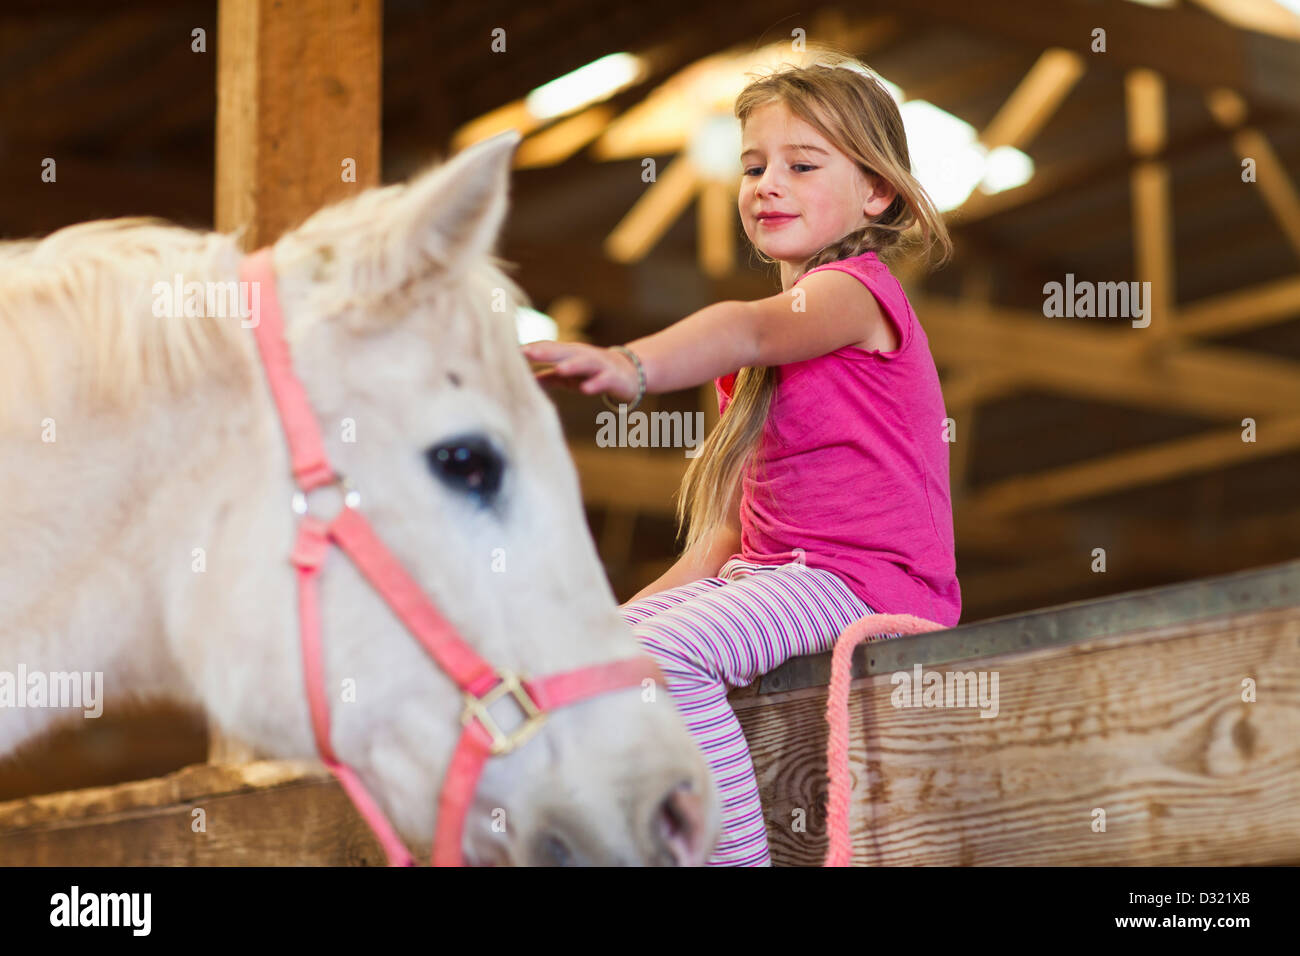 Caucasian girl petting horse in barn Banque D'Images